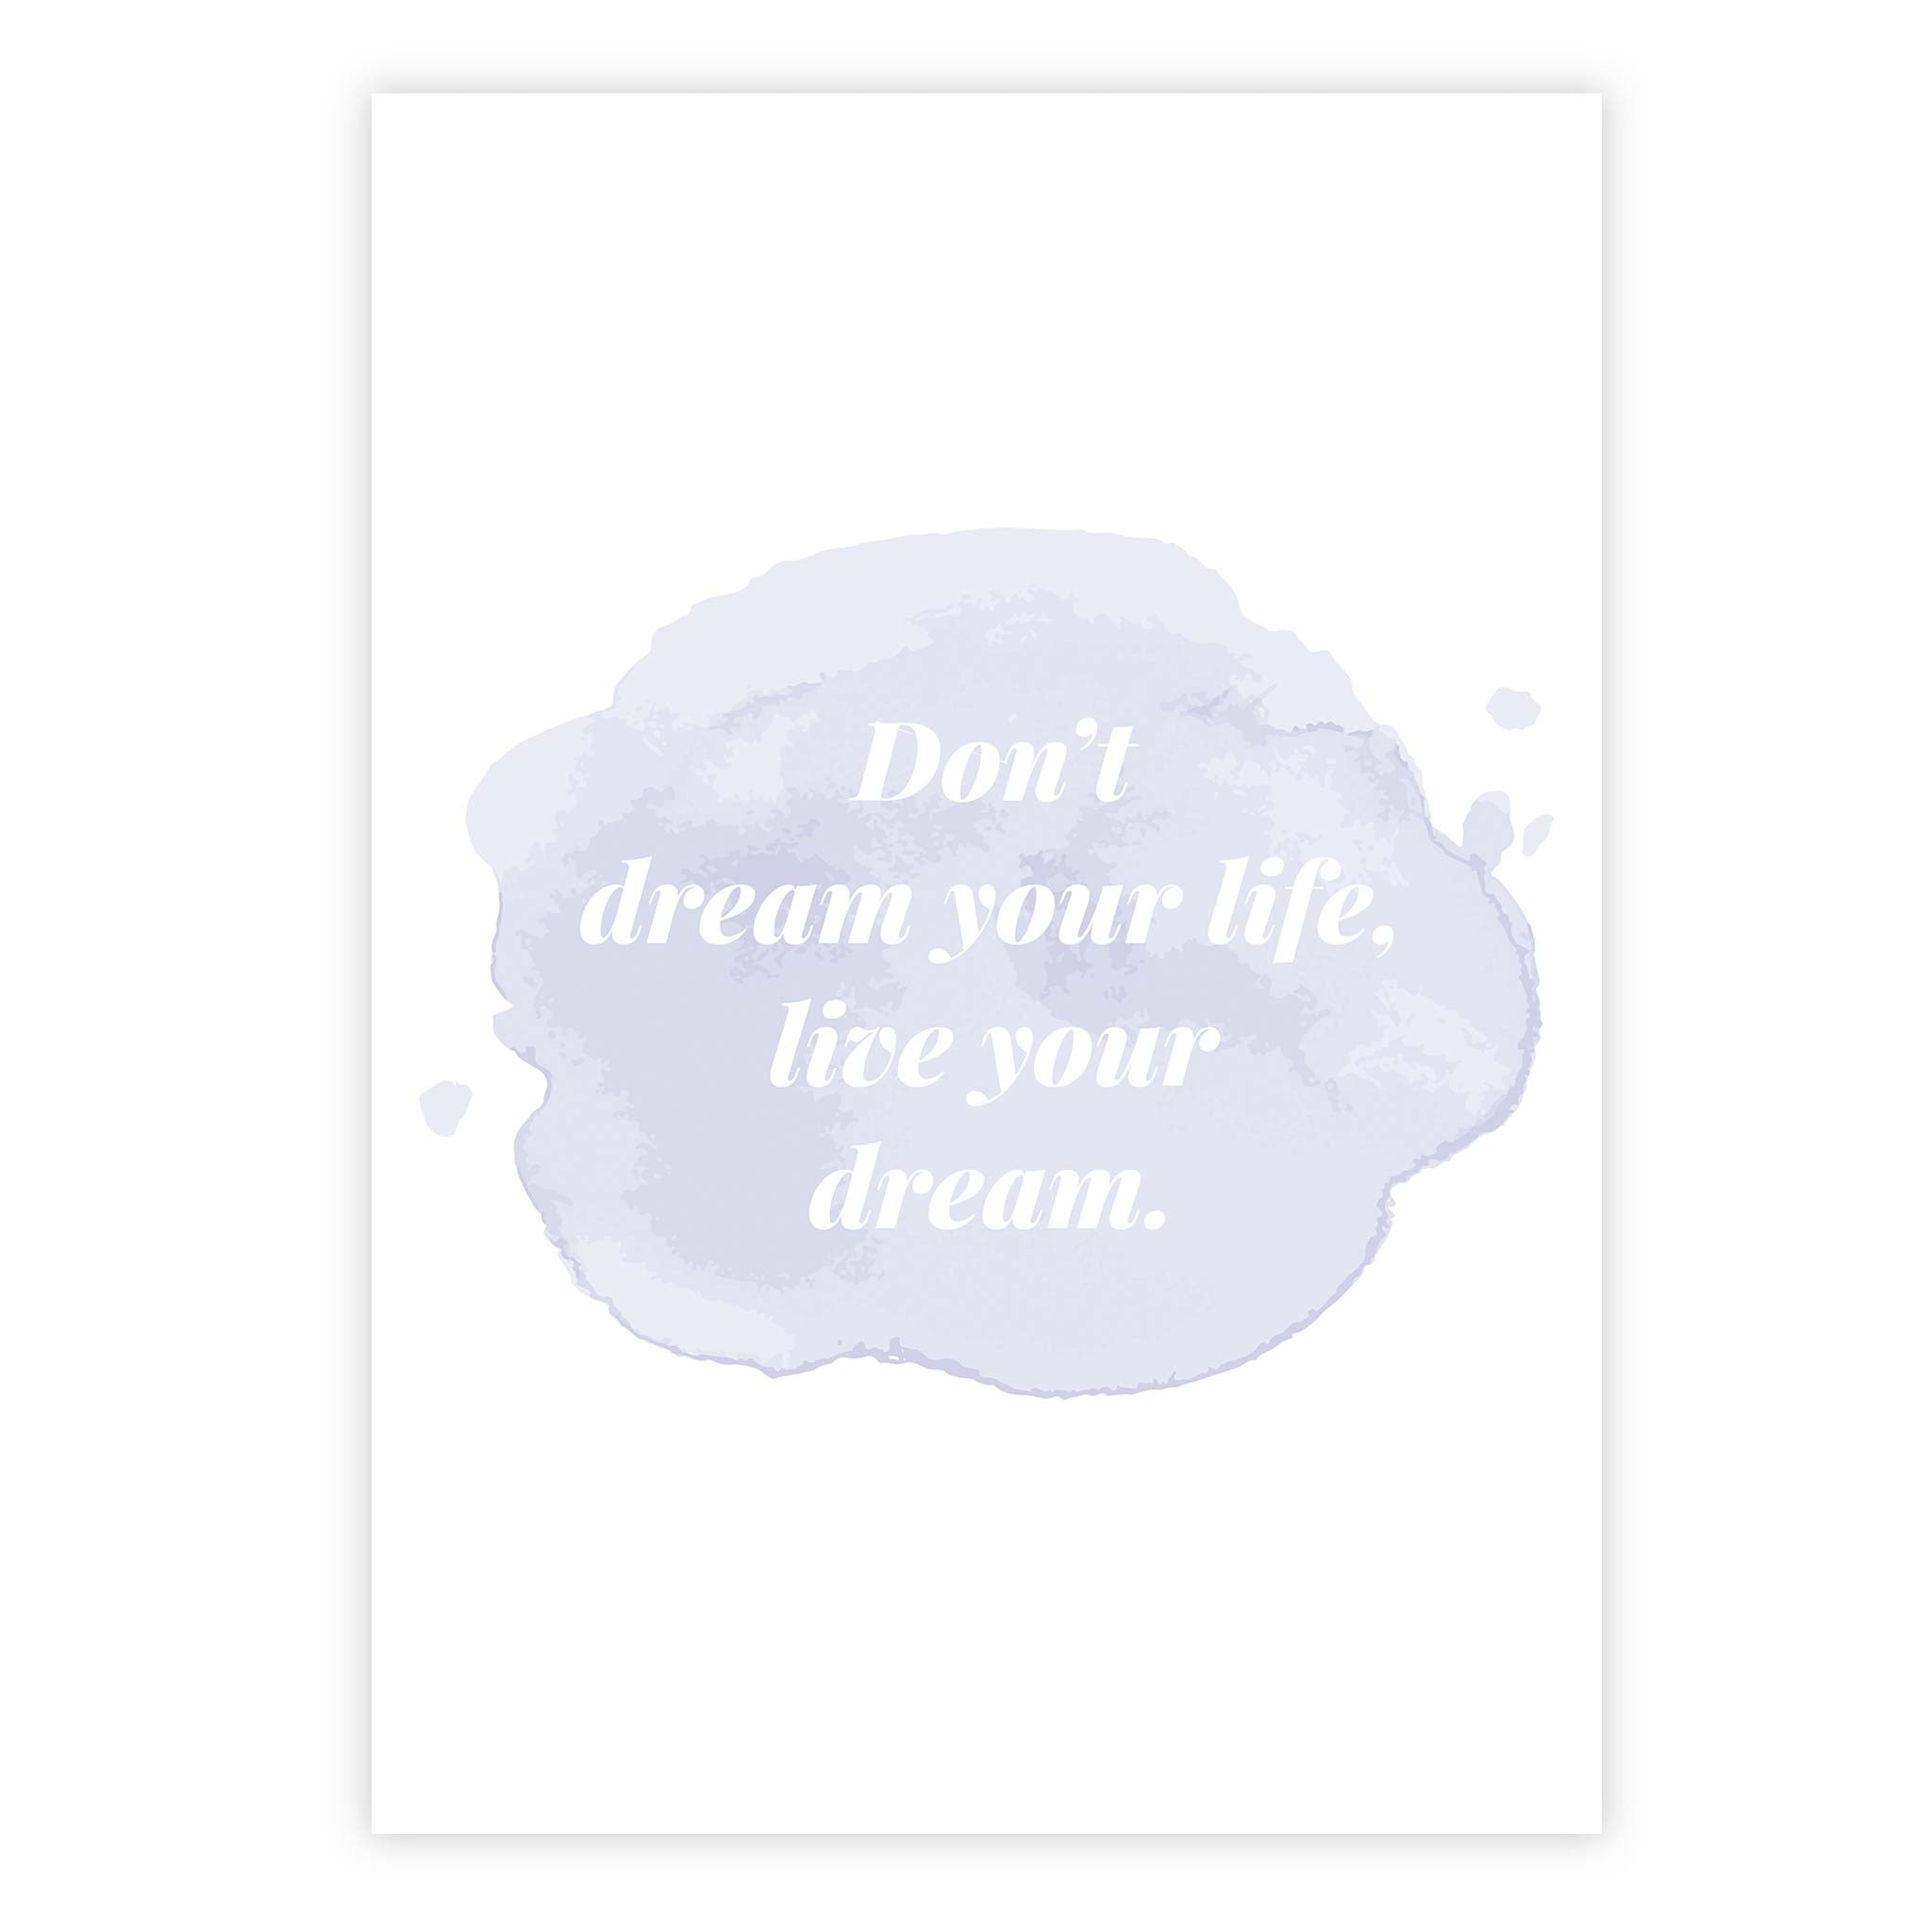 Don’t dream your life, live your dream